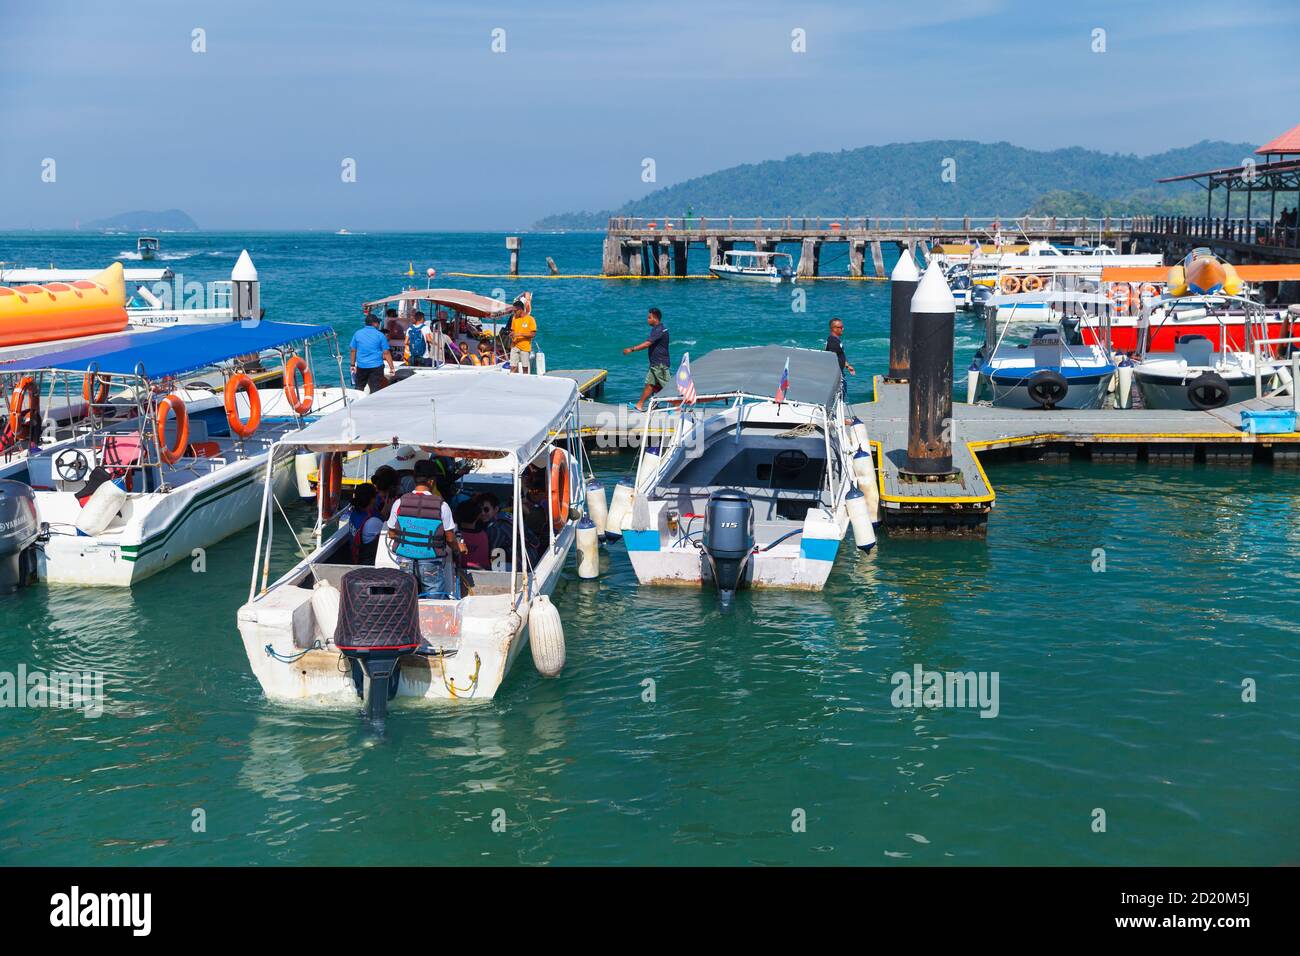 Kota Kinabalu, Malaysia - March 17, 2019: Pleasure motorboats with passengers are moored near Jesselton Point ferry terminal at sunny day Stock Photo